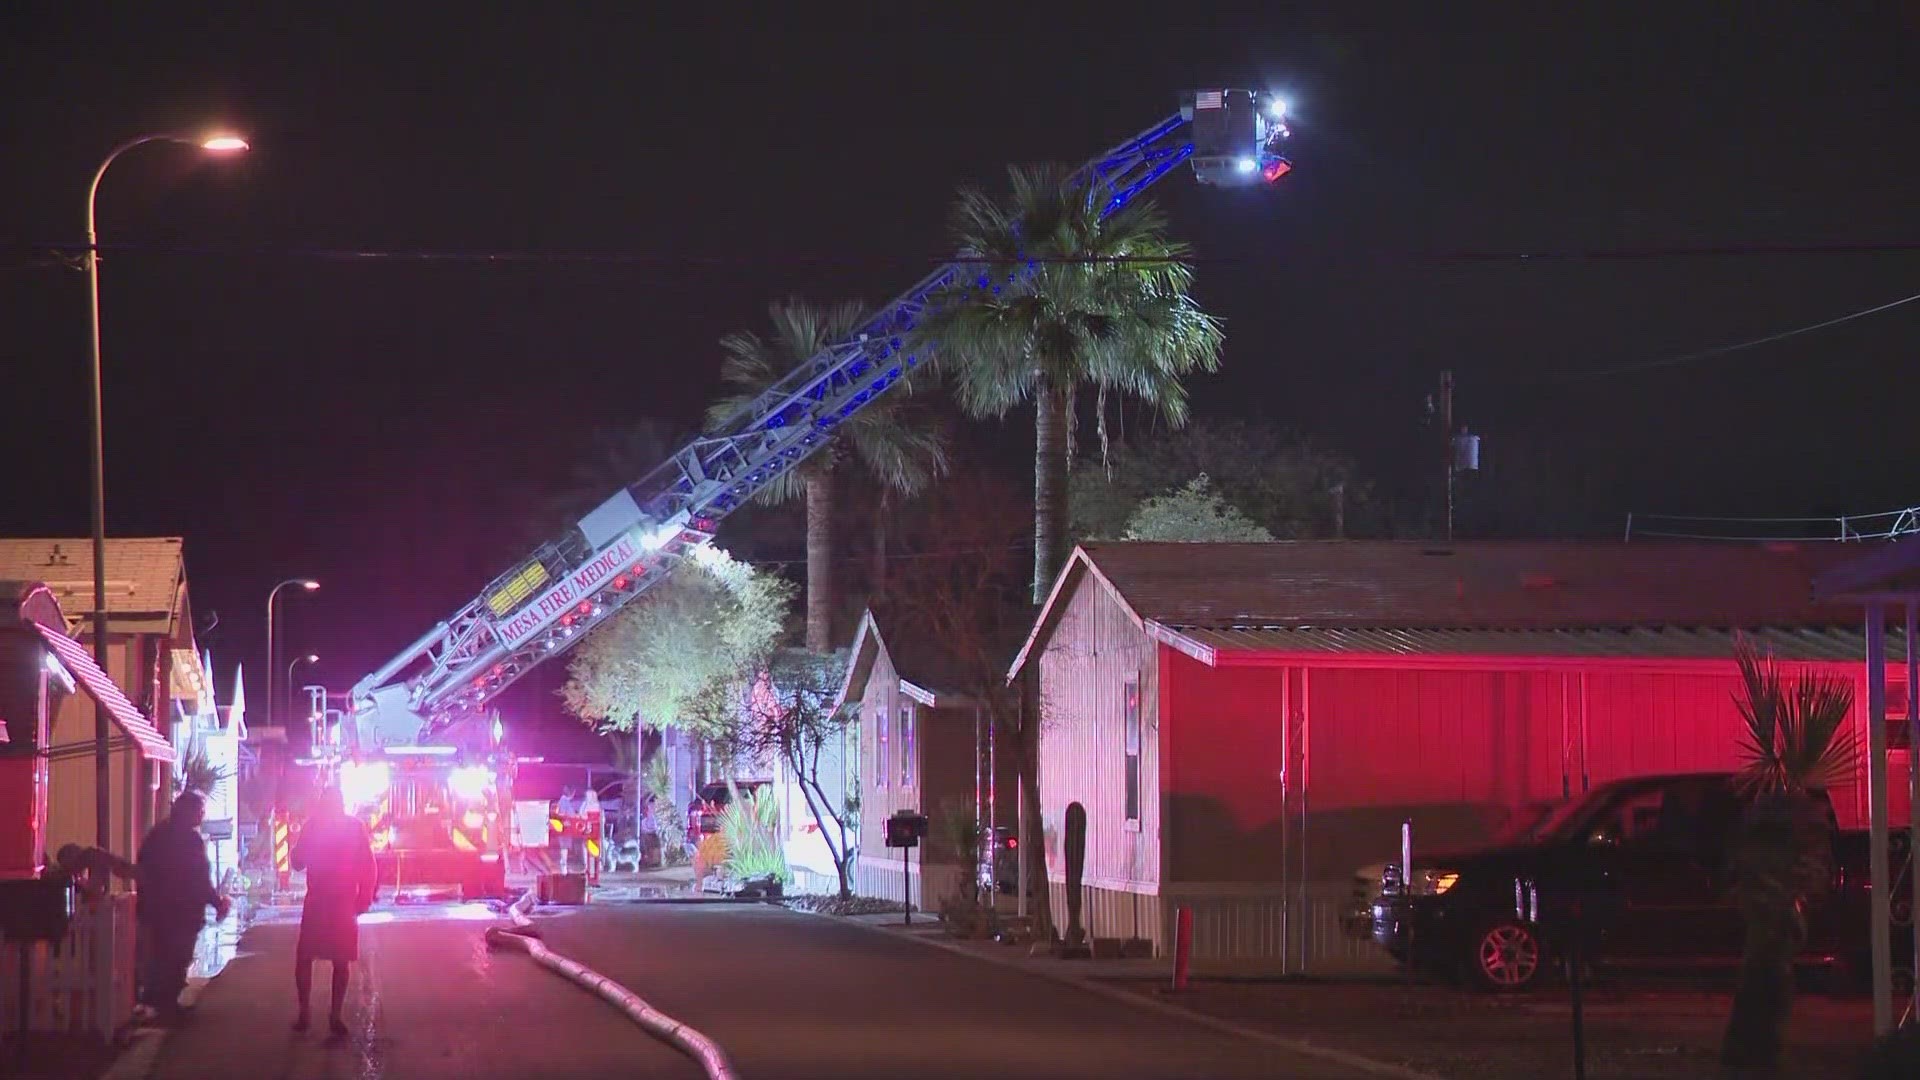 Mesa police say evidence an accelerant was found at the scene of a deadly fire that broke out early Friday morning. Watch the video above for the latest details.